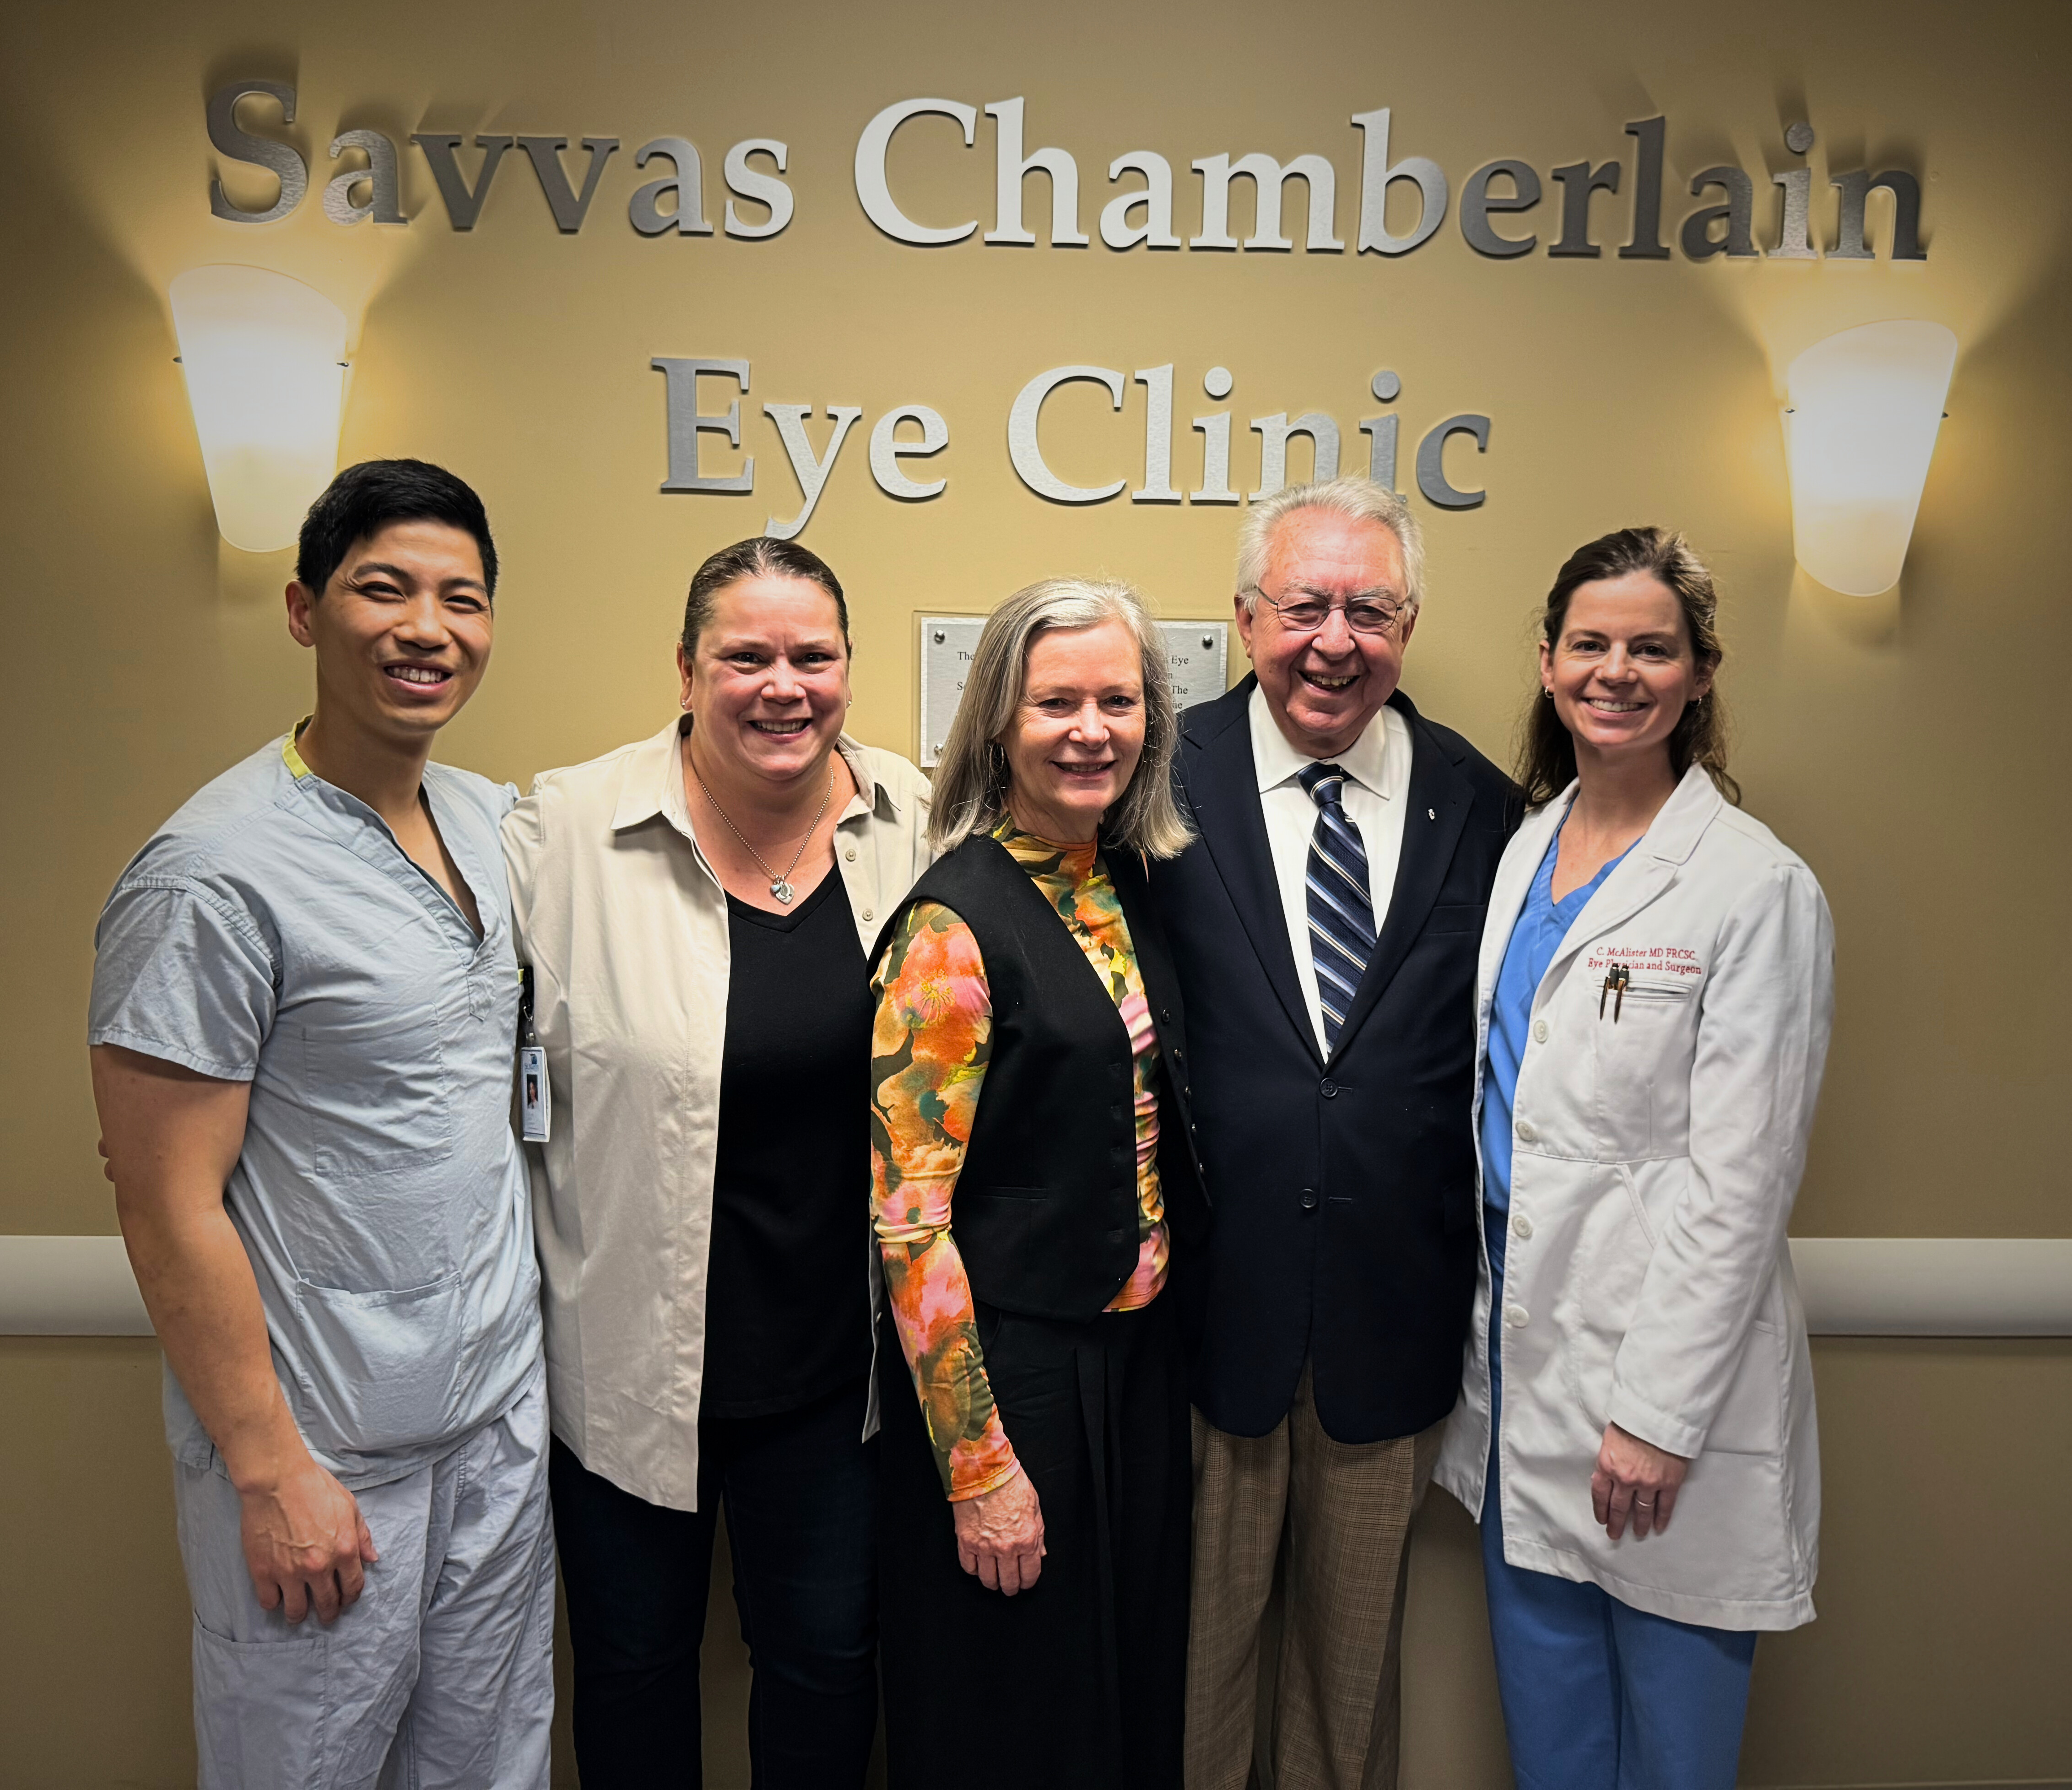 Group photo taken at the Retina Surgical Program and Eye Clinic donor naming. Left to right: Dr. Carl Shen, Maria Harper, Christine Chamberlain, Dr. Savvas Chamberlain, Dr. Chryssa McAlister stand together in front of the signage that reads: Savvas Chamberlain Eye Clinic